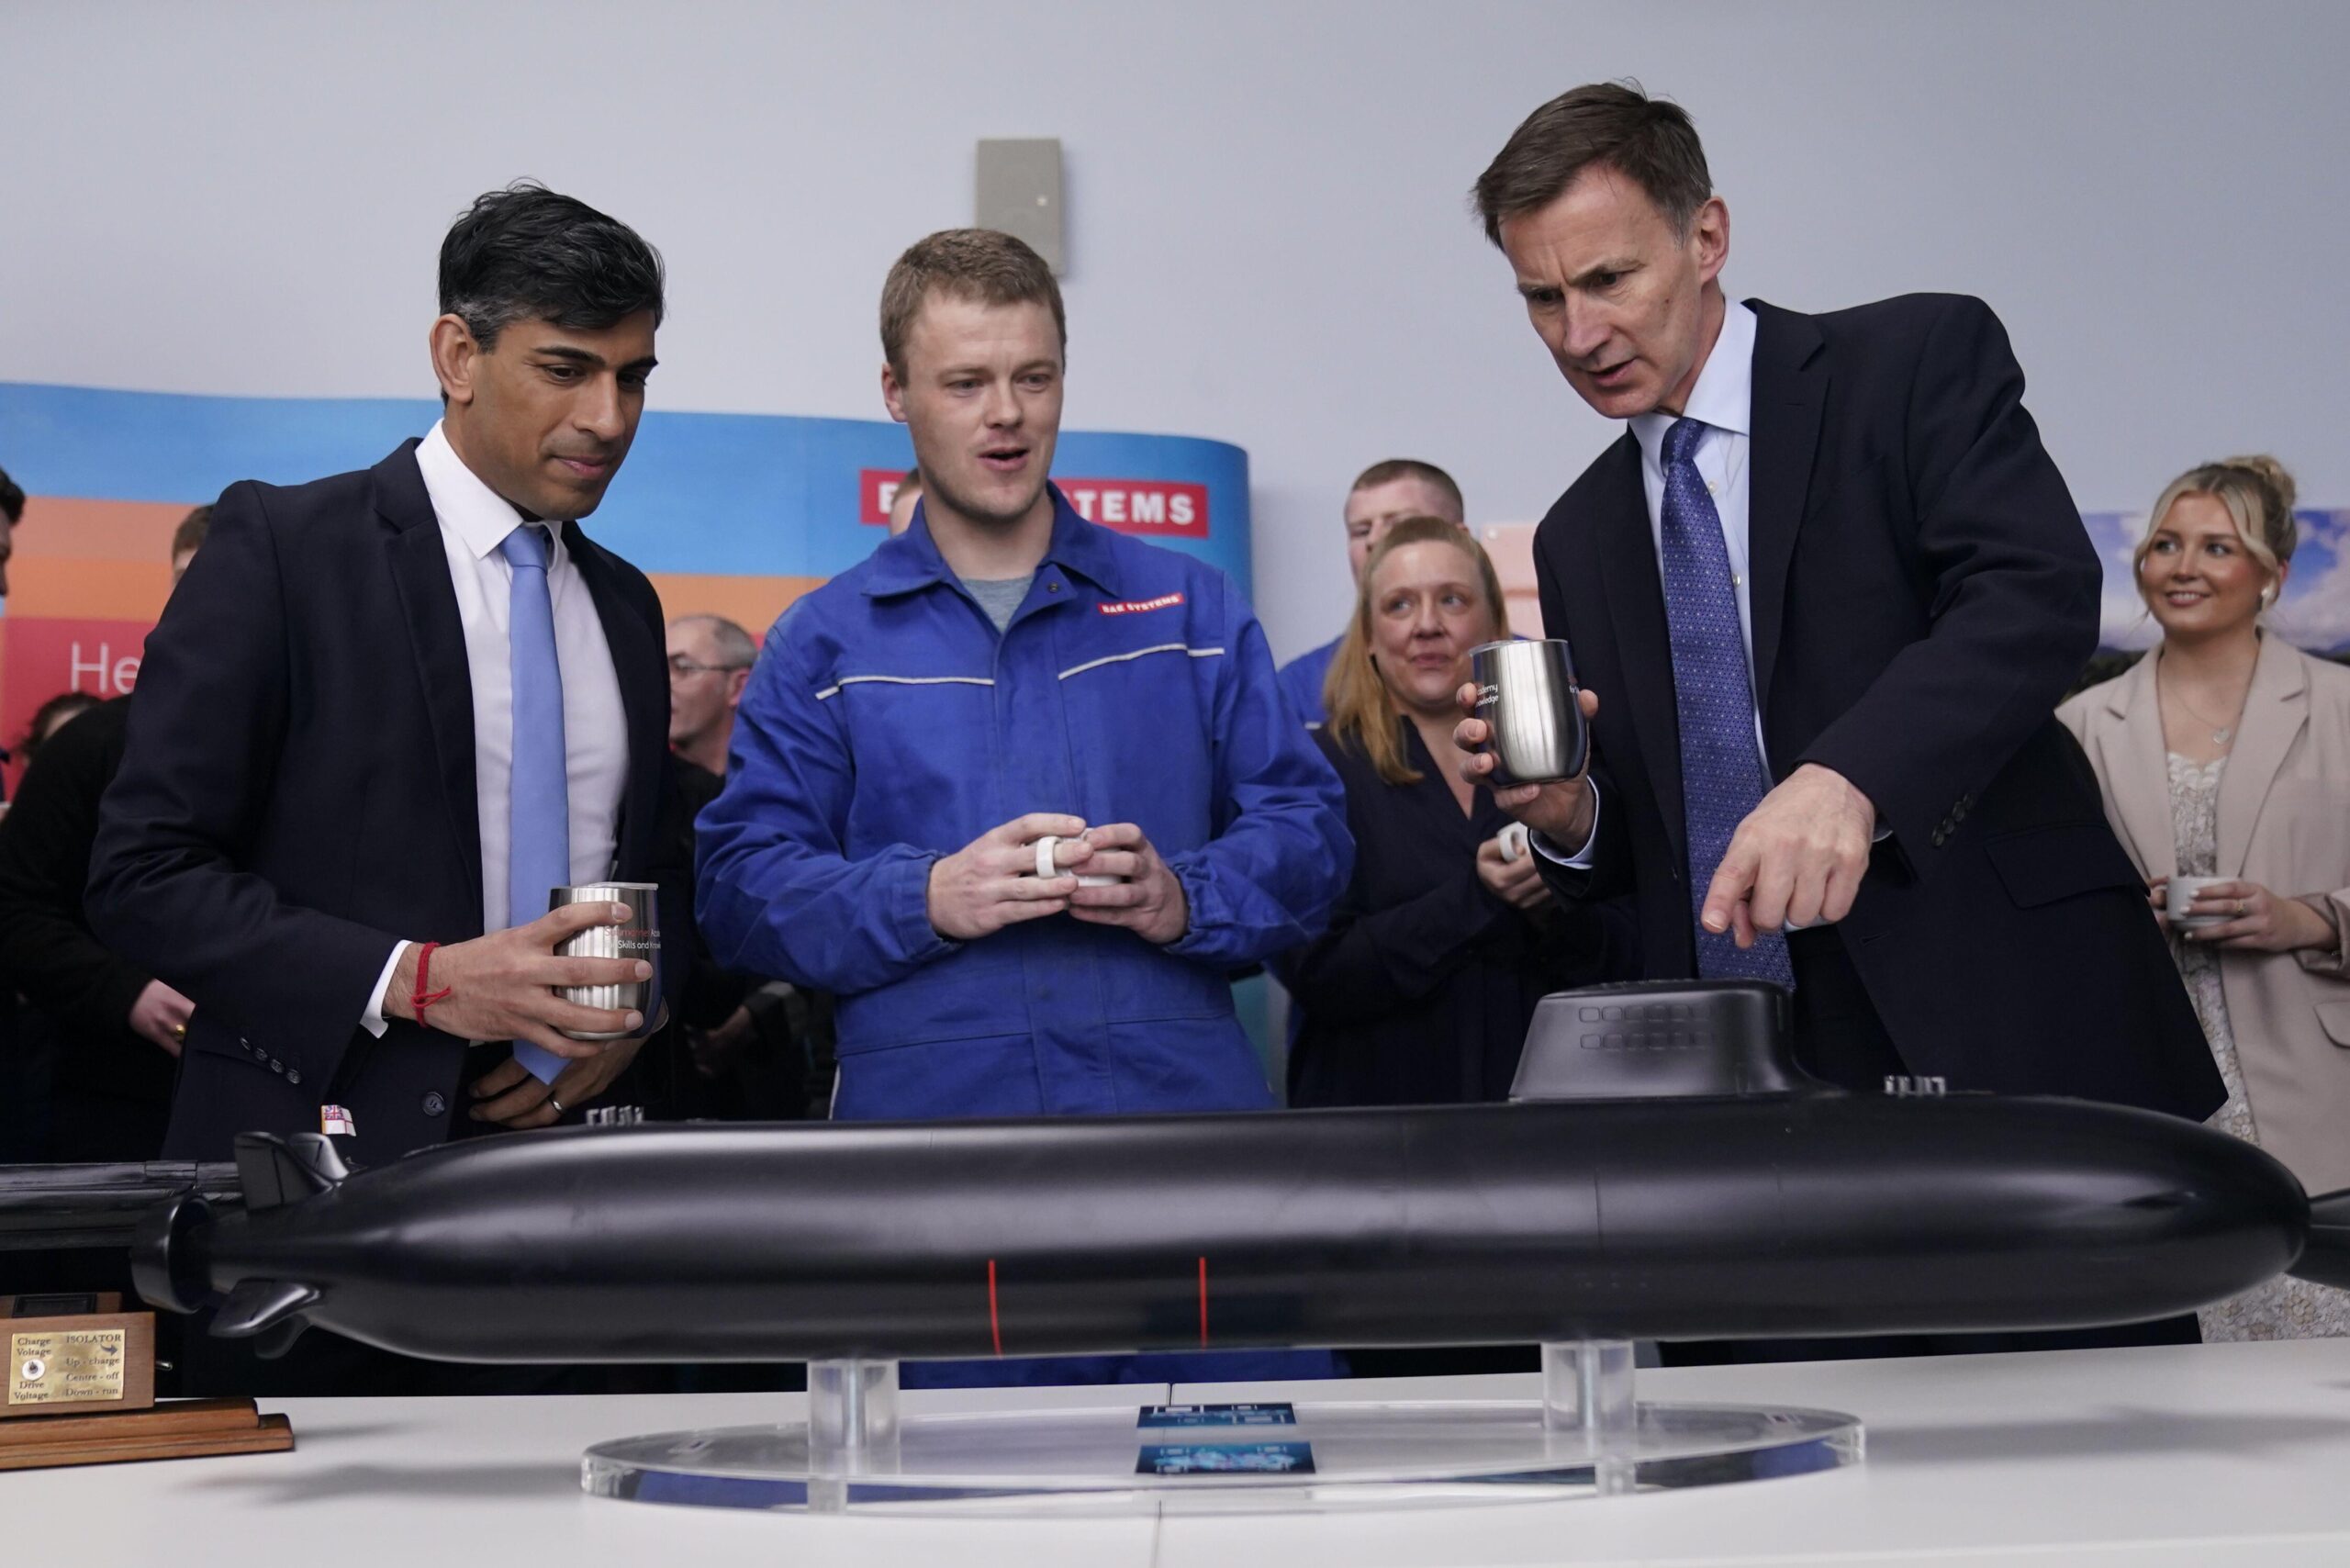 Rishi Sunak and Jeremy Hunt stand behind a mockup model of an SSN-AUKUS submarine with a worker in blue overalls standing between them.